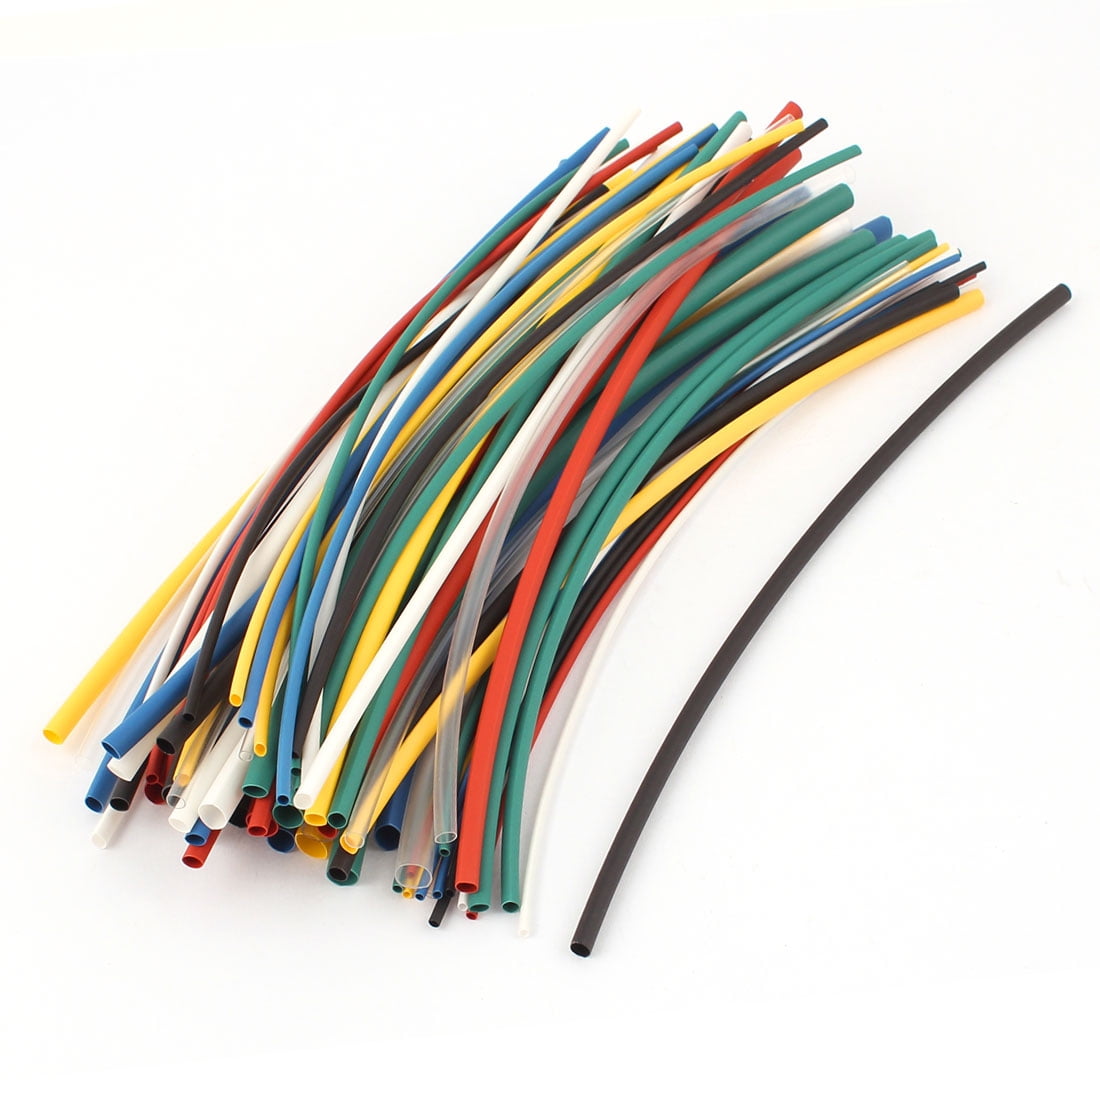 150pc Heat Shrink Wire Wrap Assortment Tubing Electrical Connection Cable Sleeve 